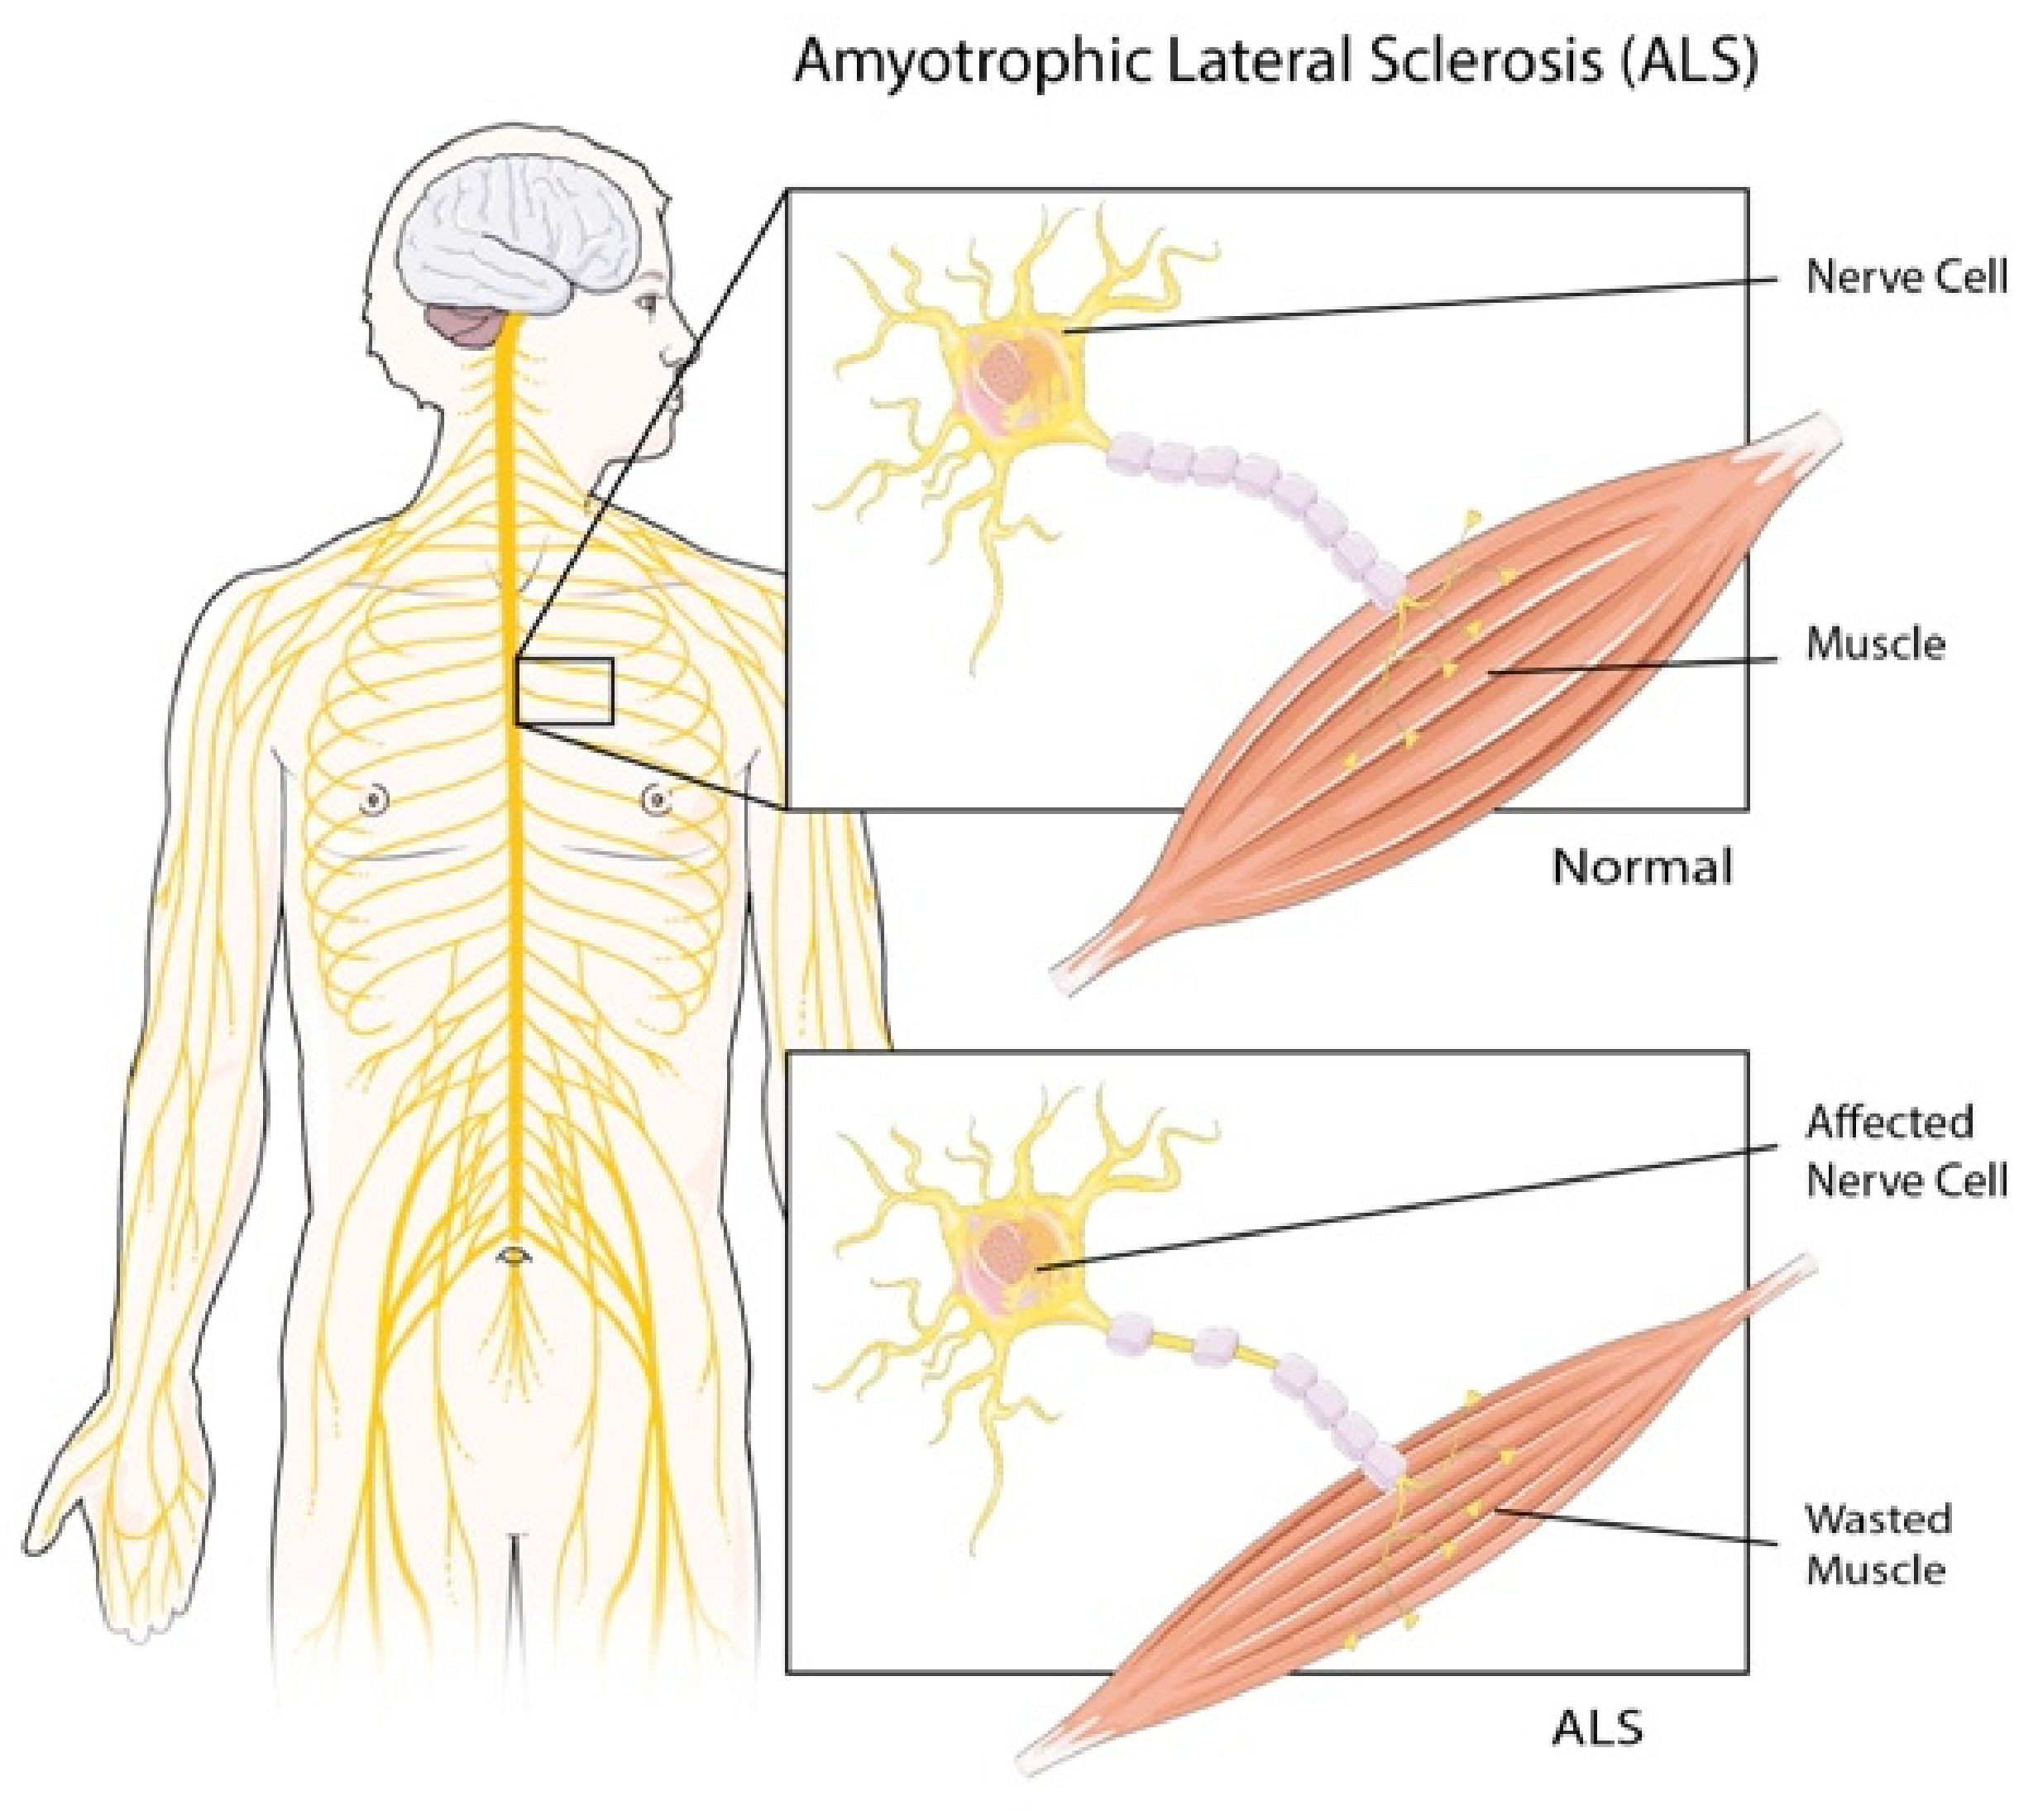 What to Know About Amyotrophic Lateral Sclerosis (ALS)